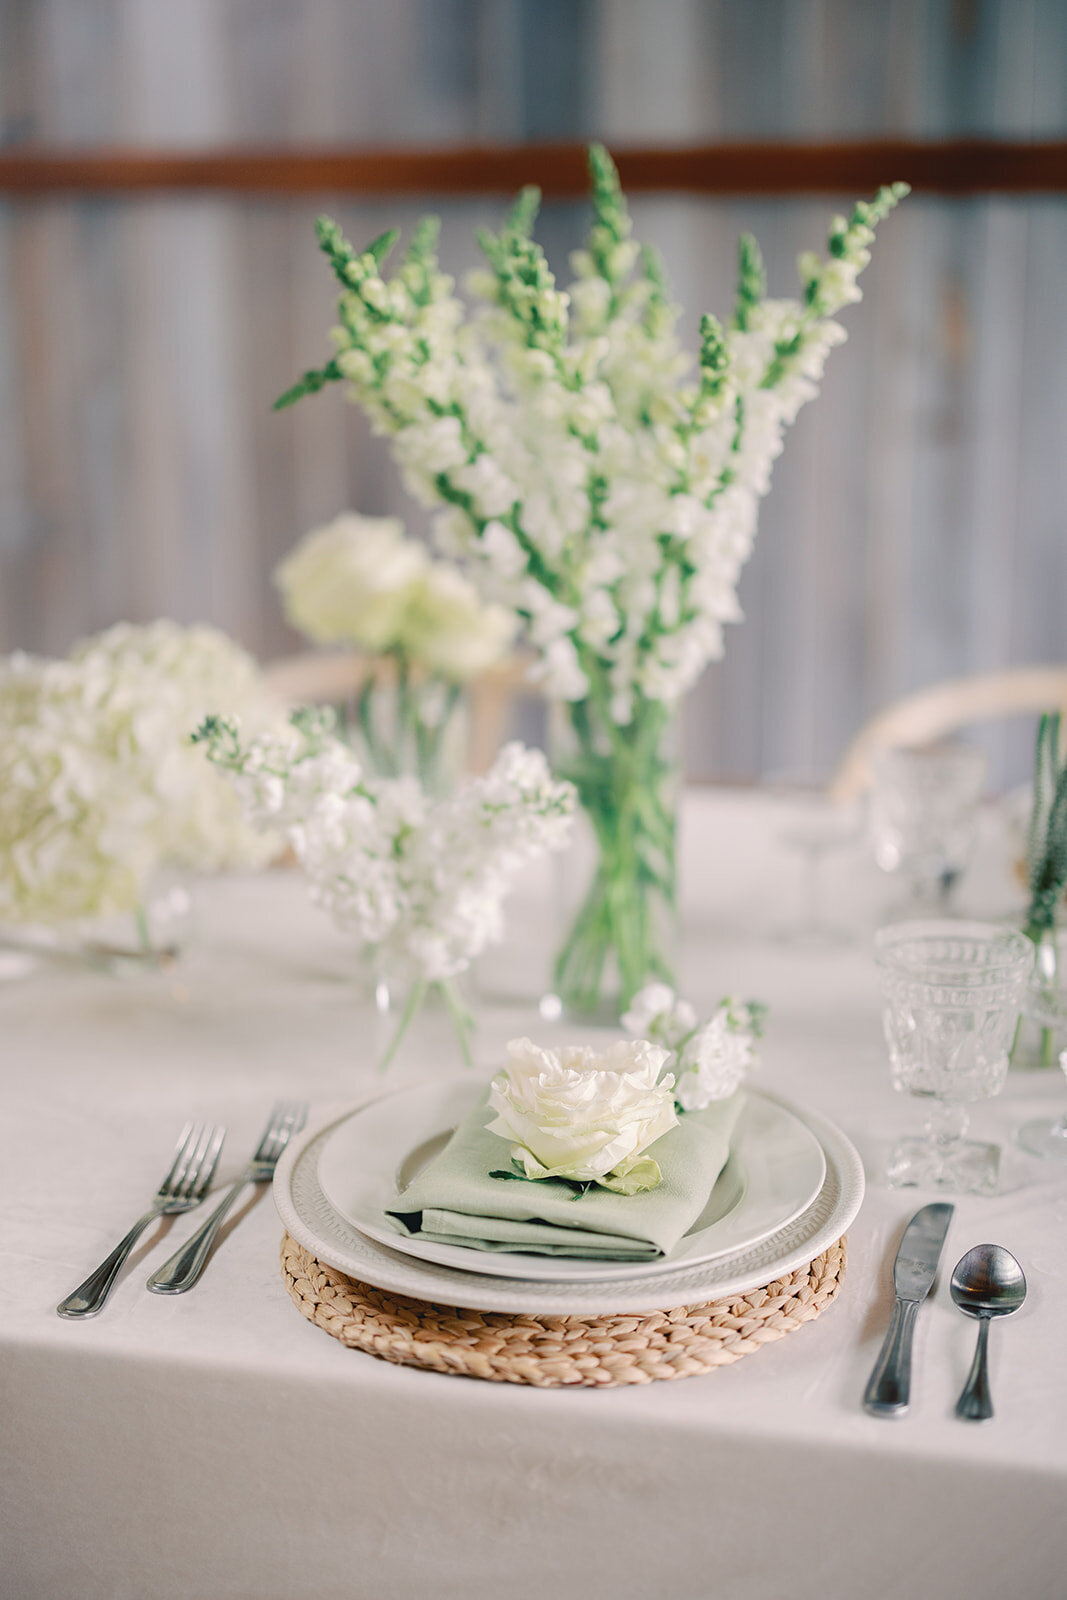 Table setting with white and green decor details